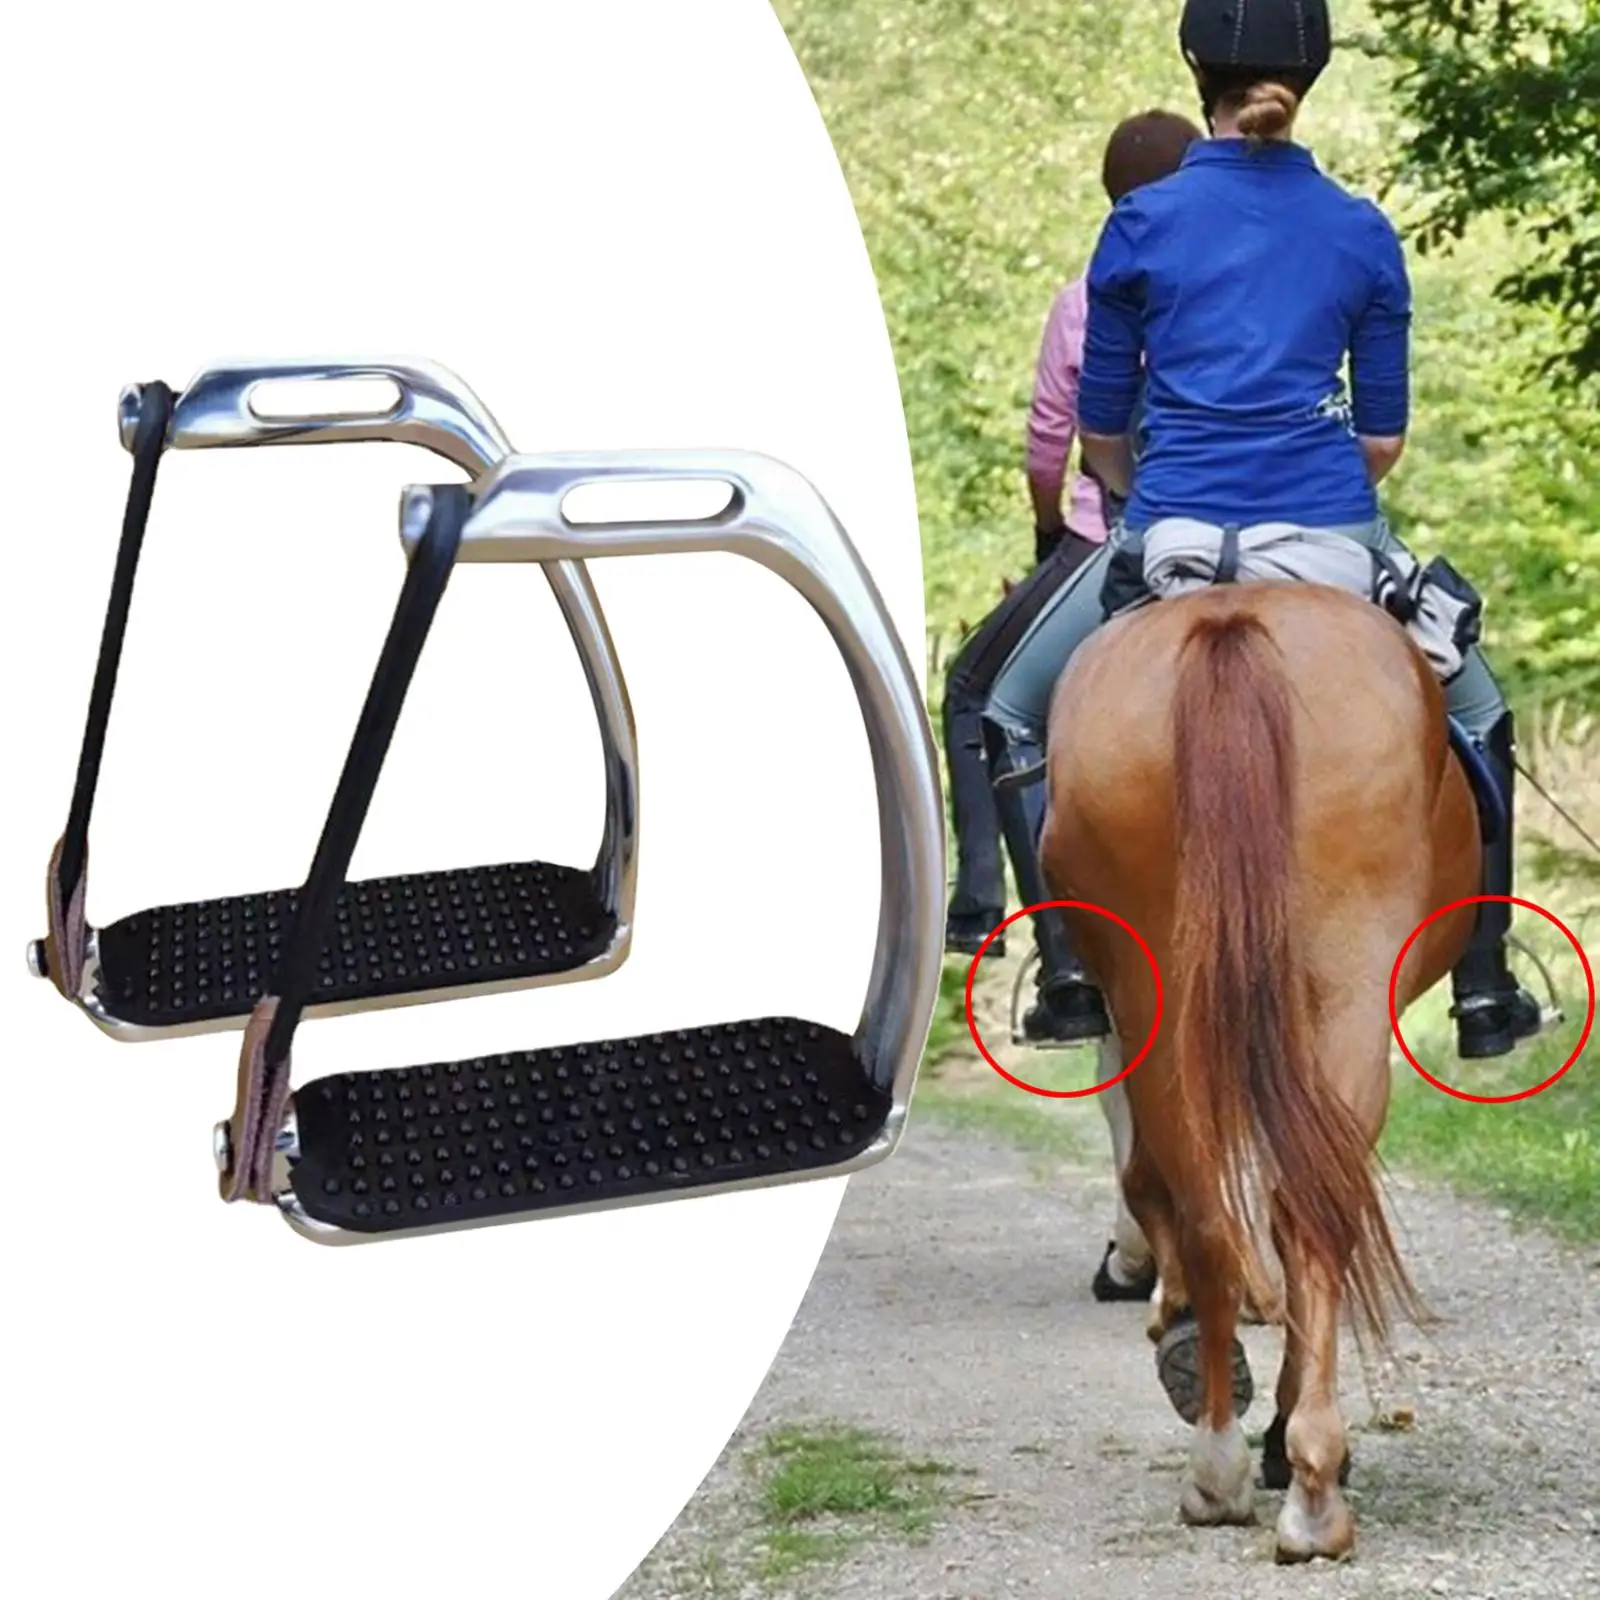 2x Horse Riding Stirrups Training Tool, Non Slip Rubber Pad, English Riding Hose Saddle for Outdoor, Adults Accessories